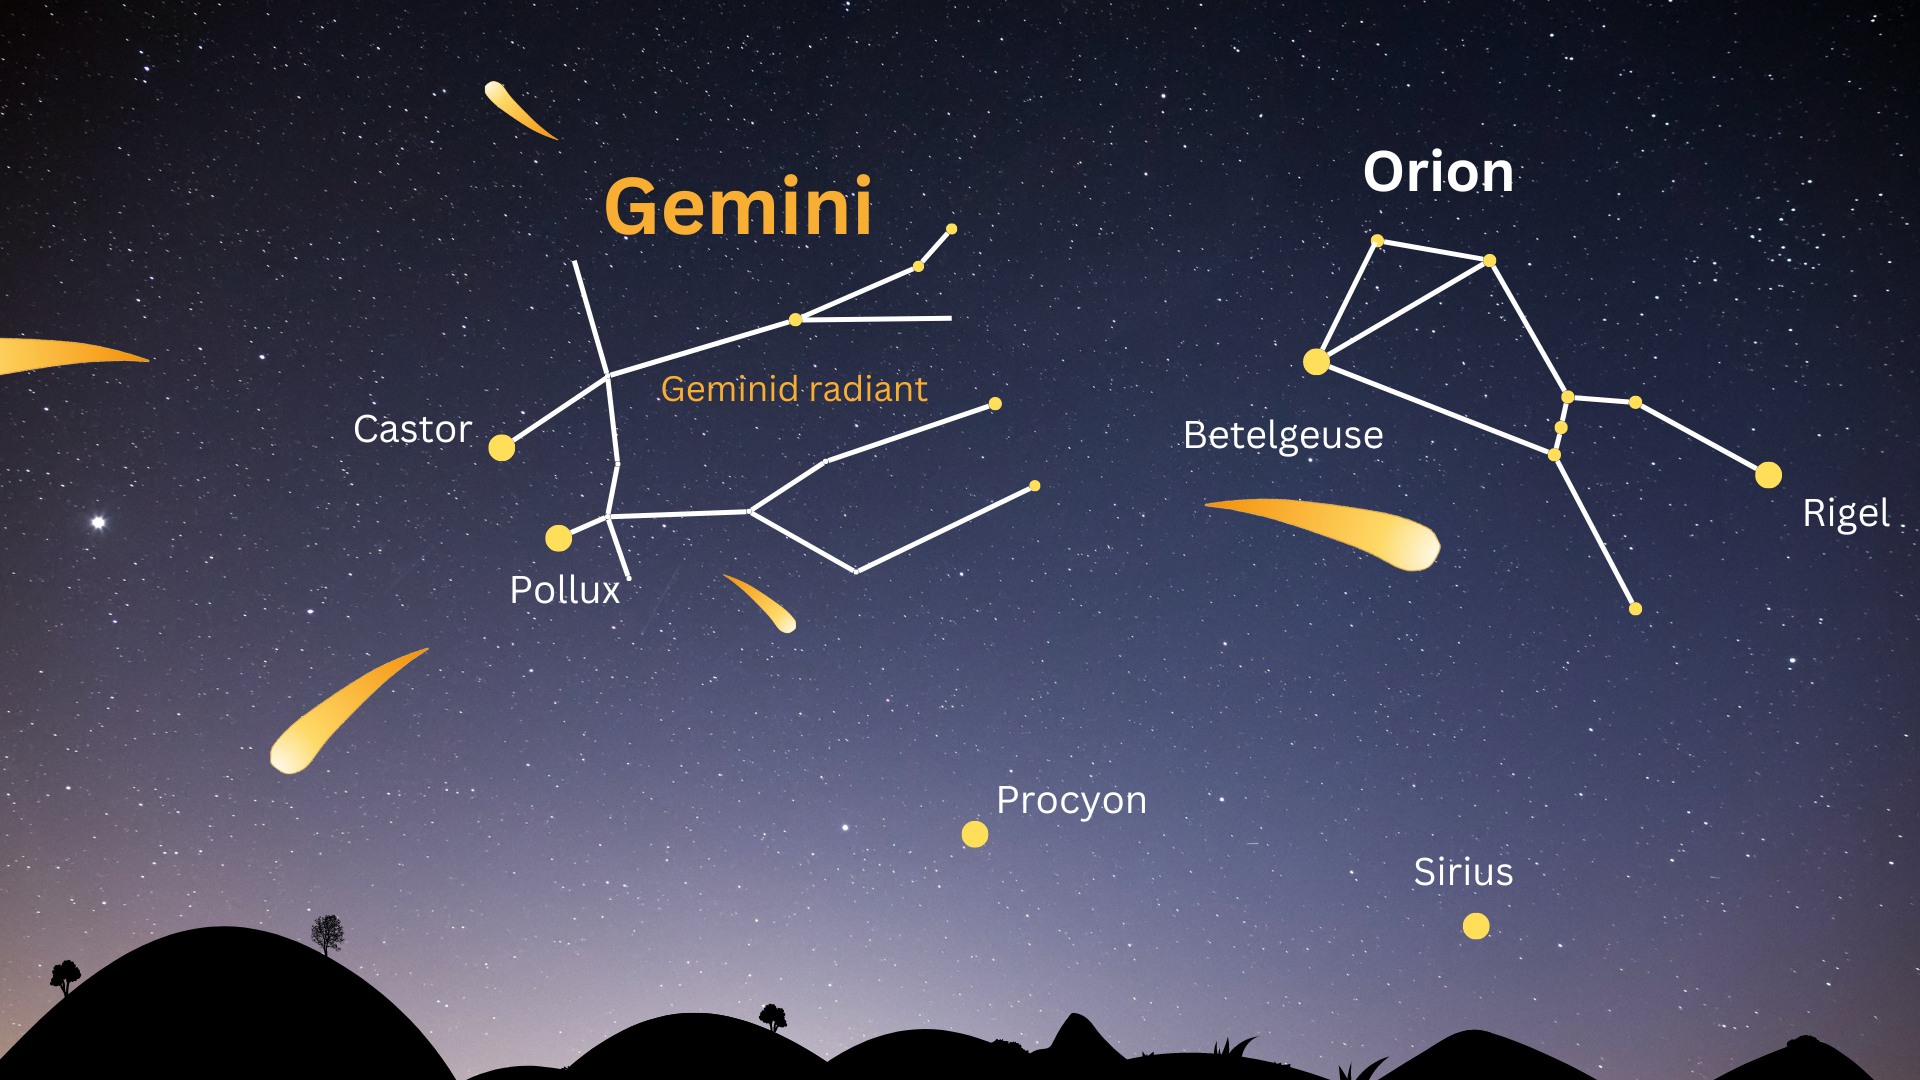 Graphic showing the constellation Gemini in the sky to the left of Orion with meteors appearing to originate from Gemini.